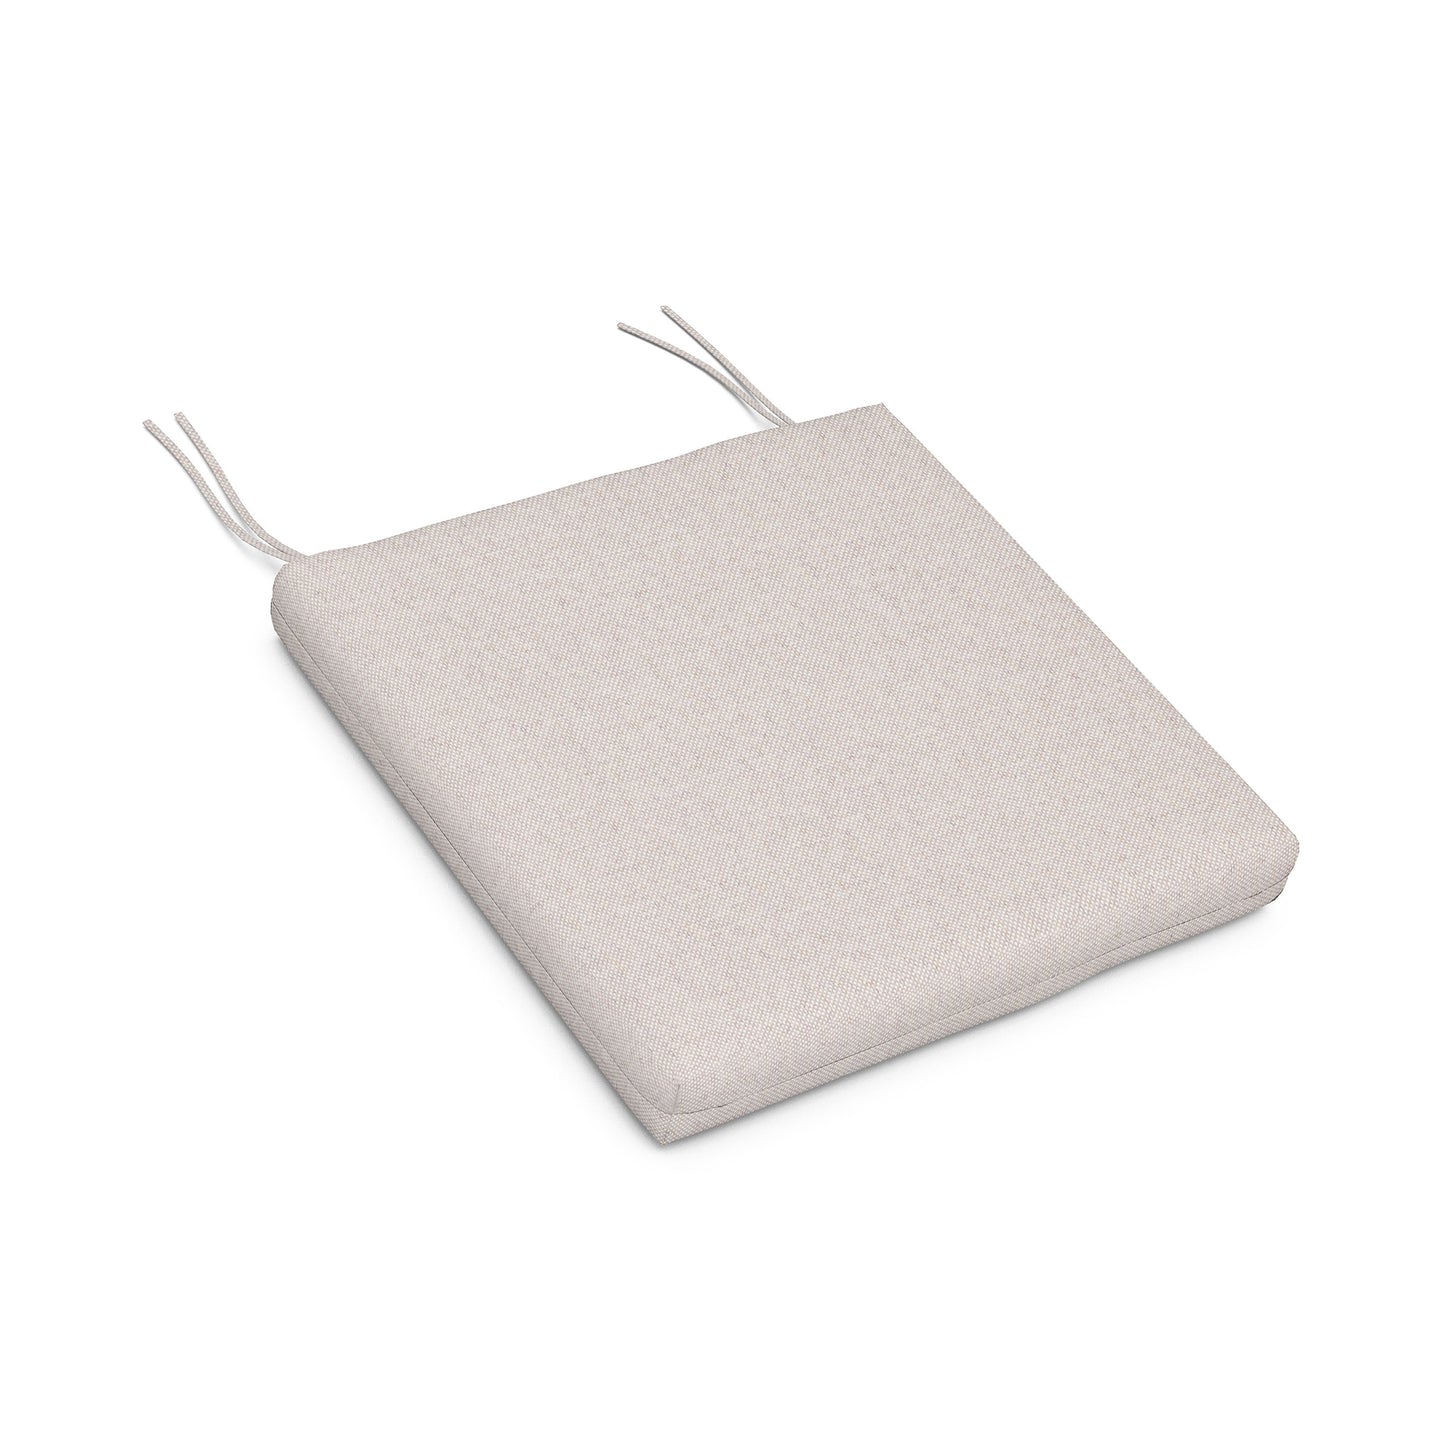 A light gray POLYWOOD® XPWS0183 seat cushion with two fabric ties visible on a white background.